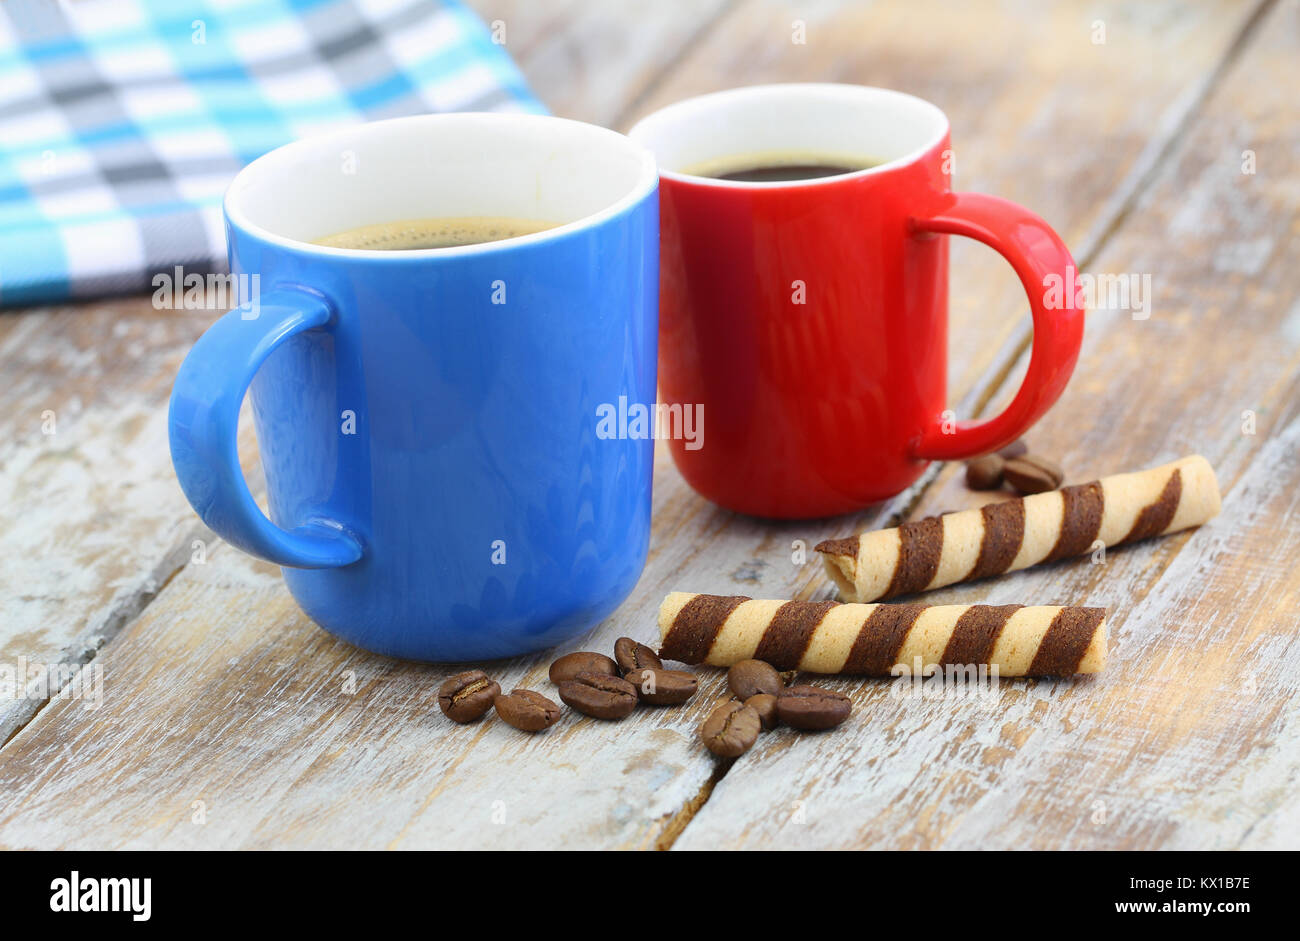 Two colorful coffee mugs and crunchy wafers on rustic wooden surface Stock Photo